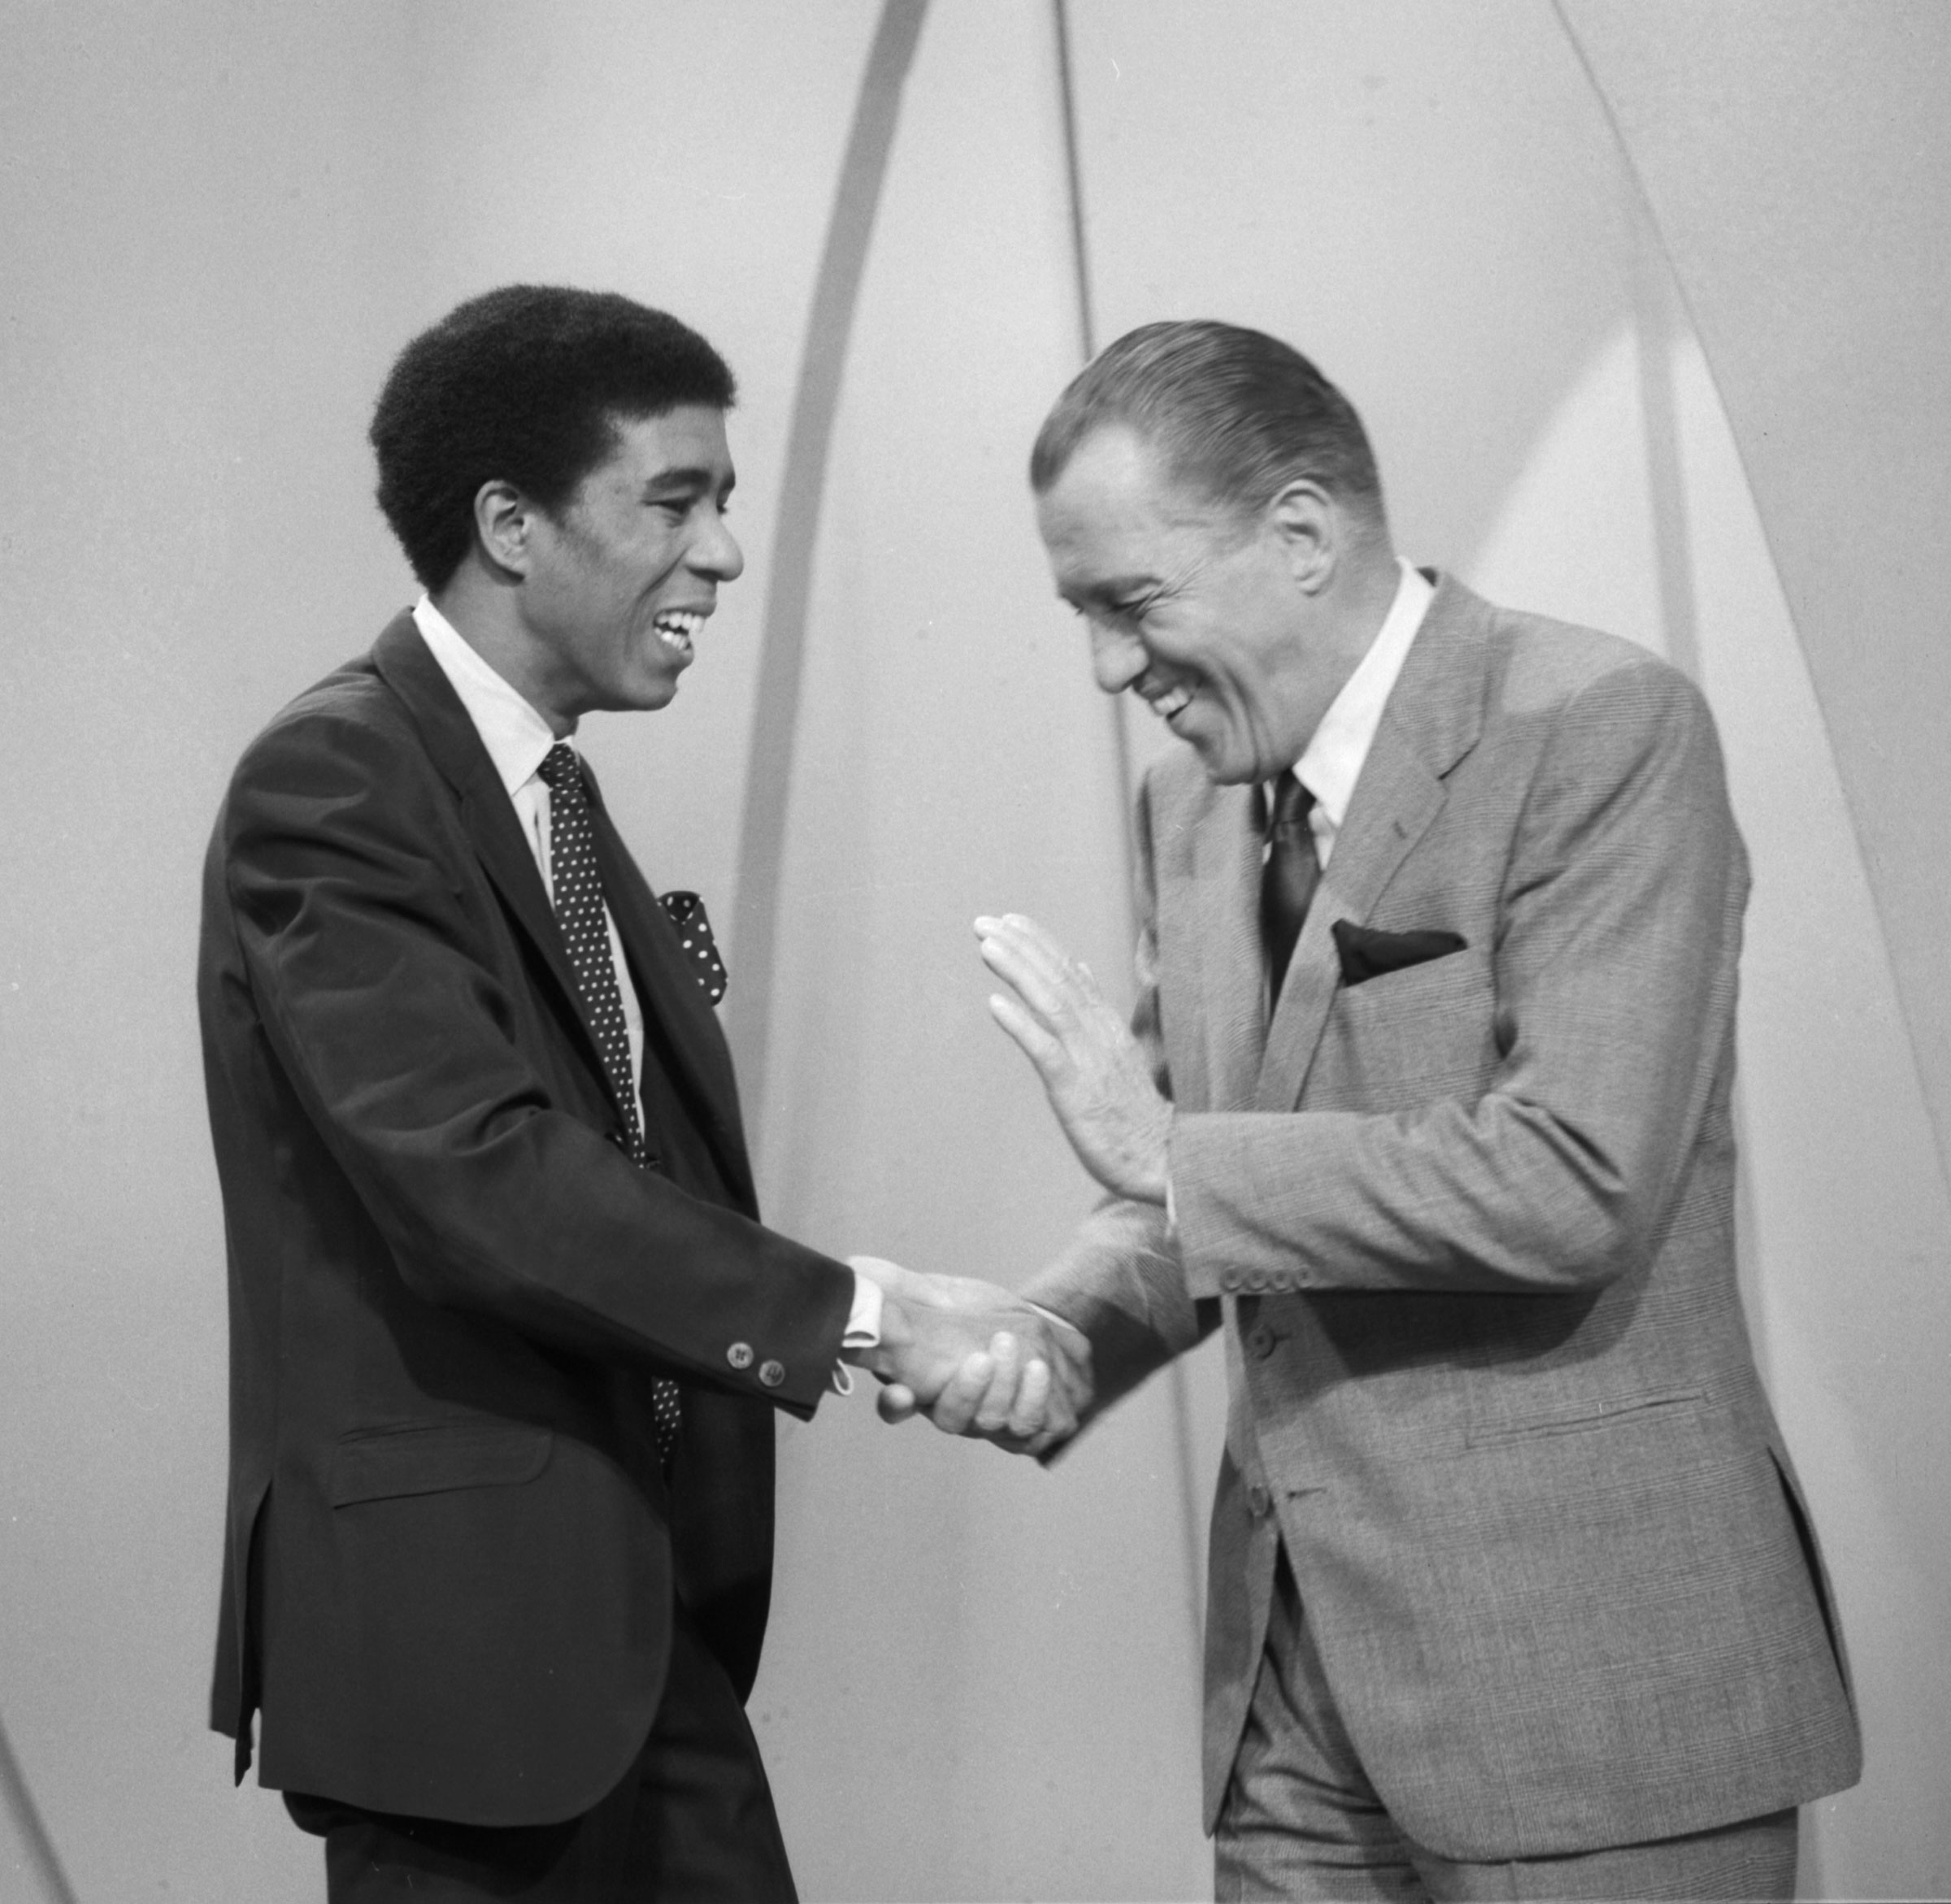 Show host Ed Sullivan greets guest Richard Pryor on Feb. 27, 1966. (CBS Photo Archive/Getty Images)